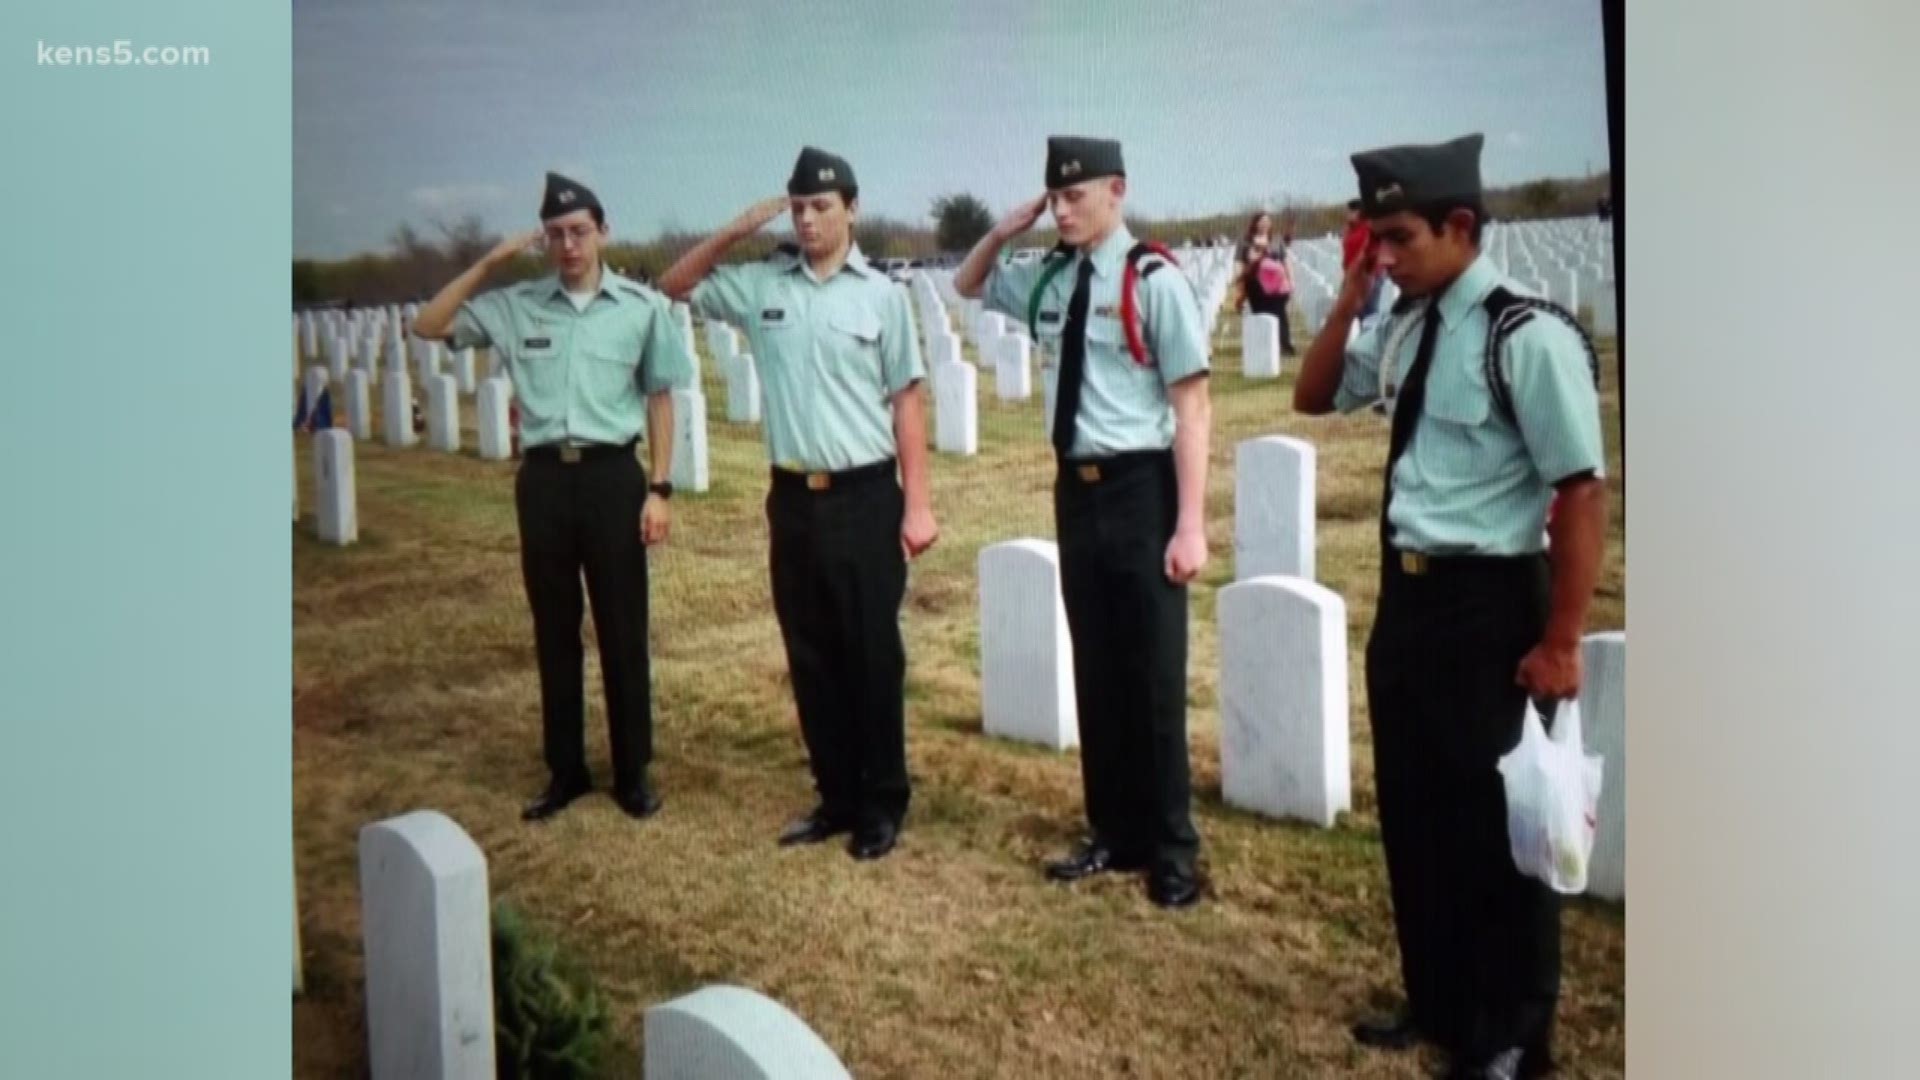 Memorial Day is a time to honor our fallen heroes who paid the ultimate sacrifice. One organization has made it their mission to make sure that sacrifice is not forgotten by placing wreaths on the headstones of those servicemembers around Christmas time. Wreaths Across America works year-round to prepare for the massive undertaking.